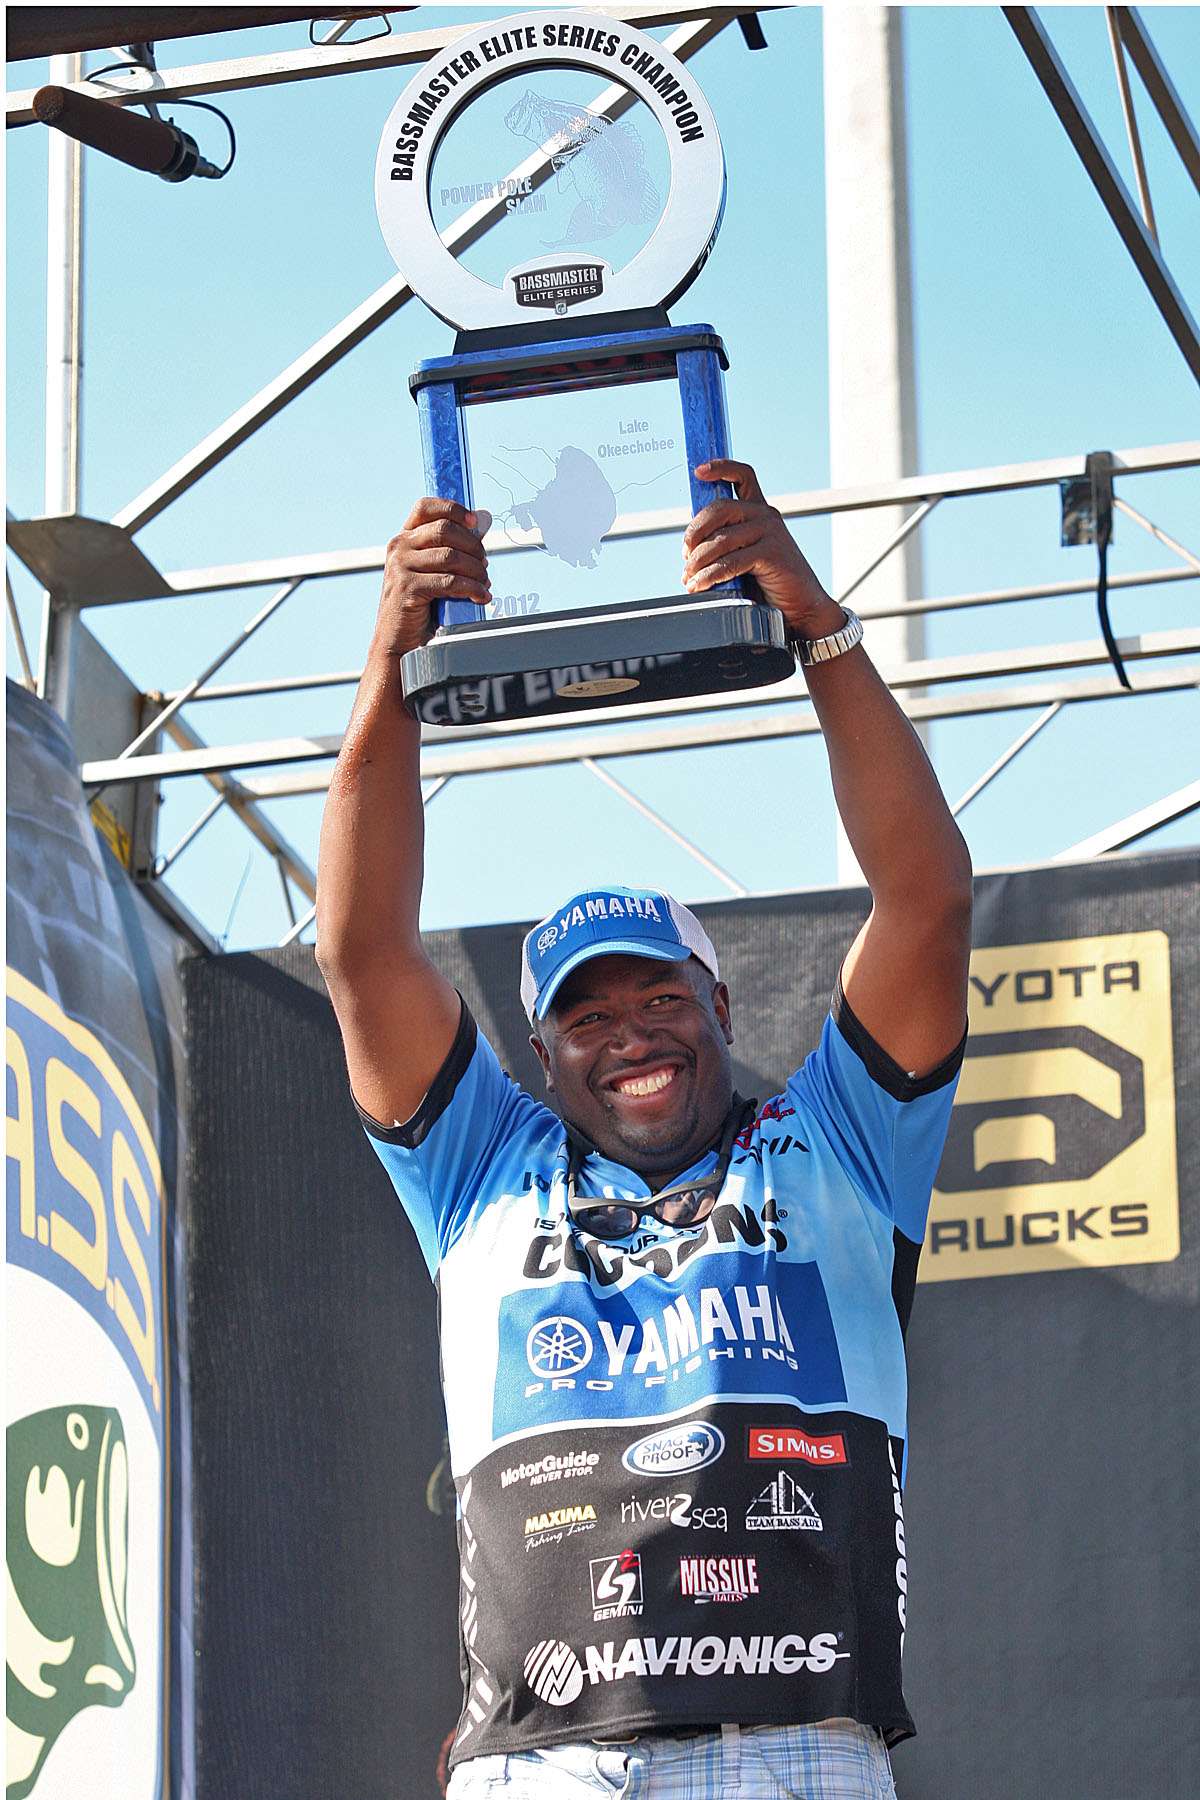 <b>The Elite on Okeechobee, March 2012</b><br>

This one rates second place because of the total weight it took for me to win. At 108 pounds, 5 ounces we showed the bass fishing world that it can be done, and that Okeechobee is still in the running for overall big bass honors.
<p>
Itâs the only tournament that I can remember where I culled 5-pound bass, one after the other. I can still remember having 34 pounds, 5 ounces in my livewell by noon on the first day. Where else in the world can an angler do something like that?